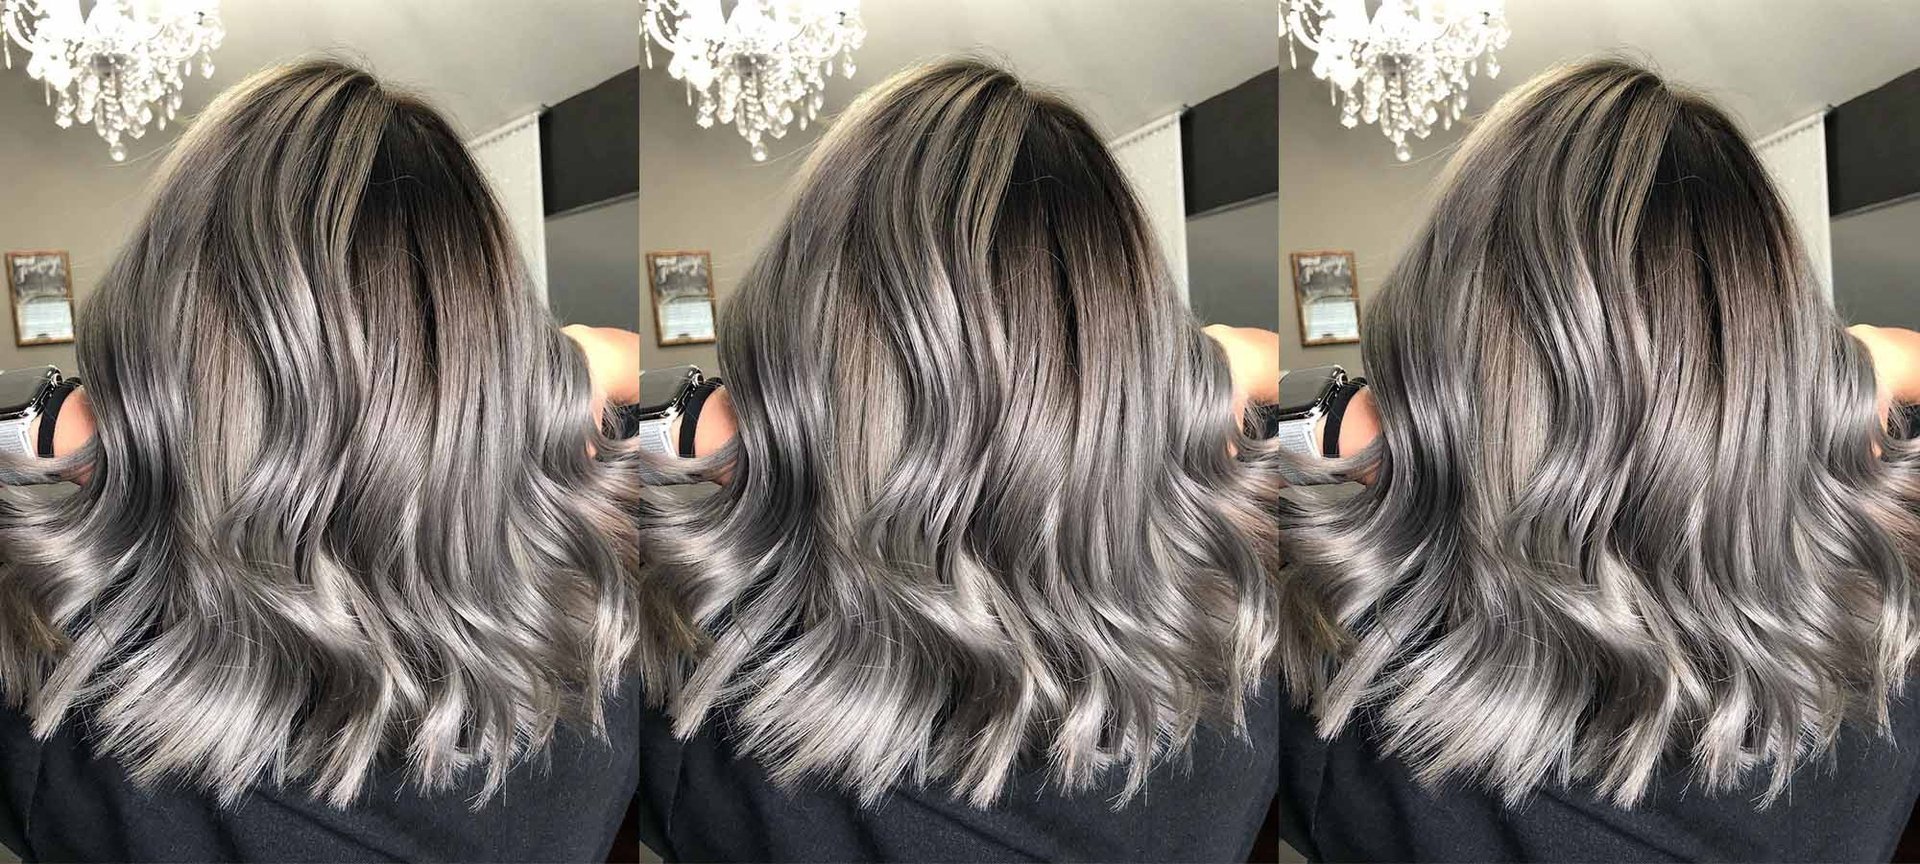 5 Shades of Gray Hair Color To Try - L'Oréal Paris